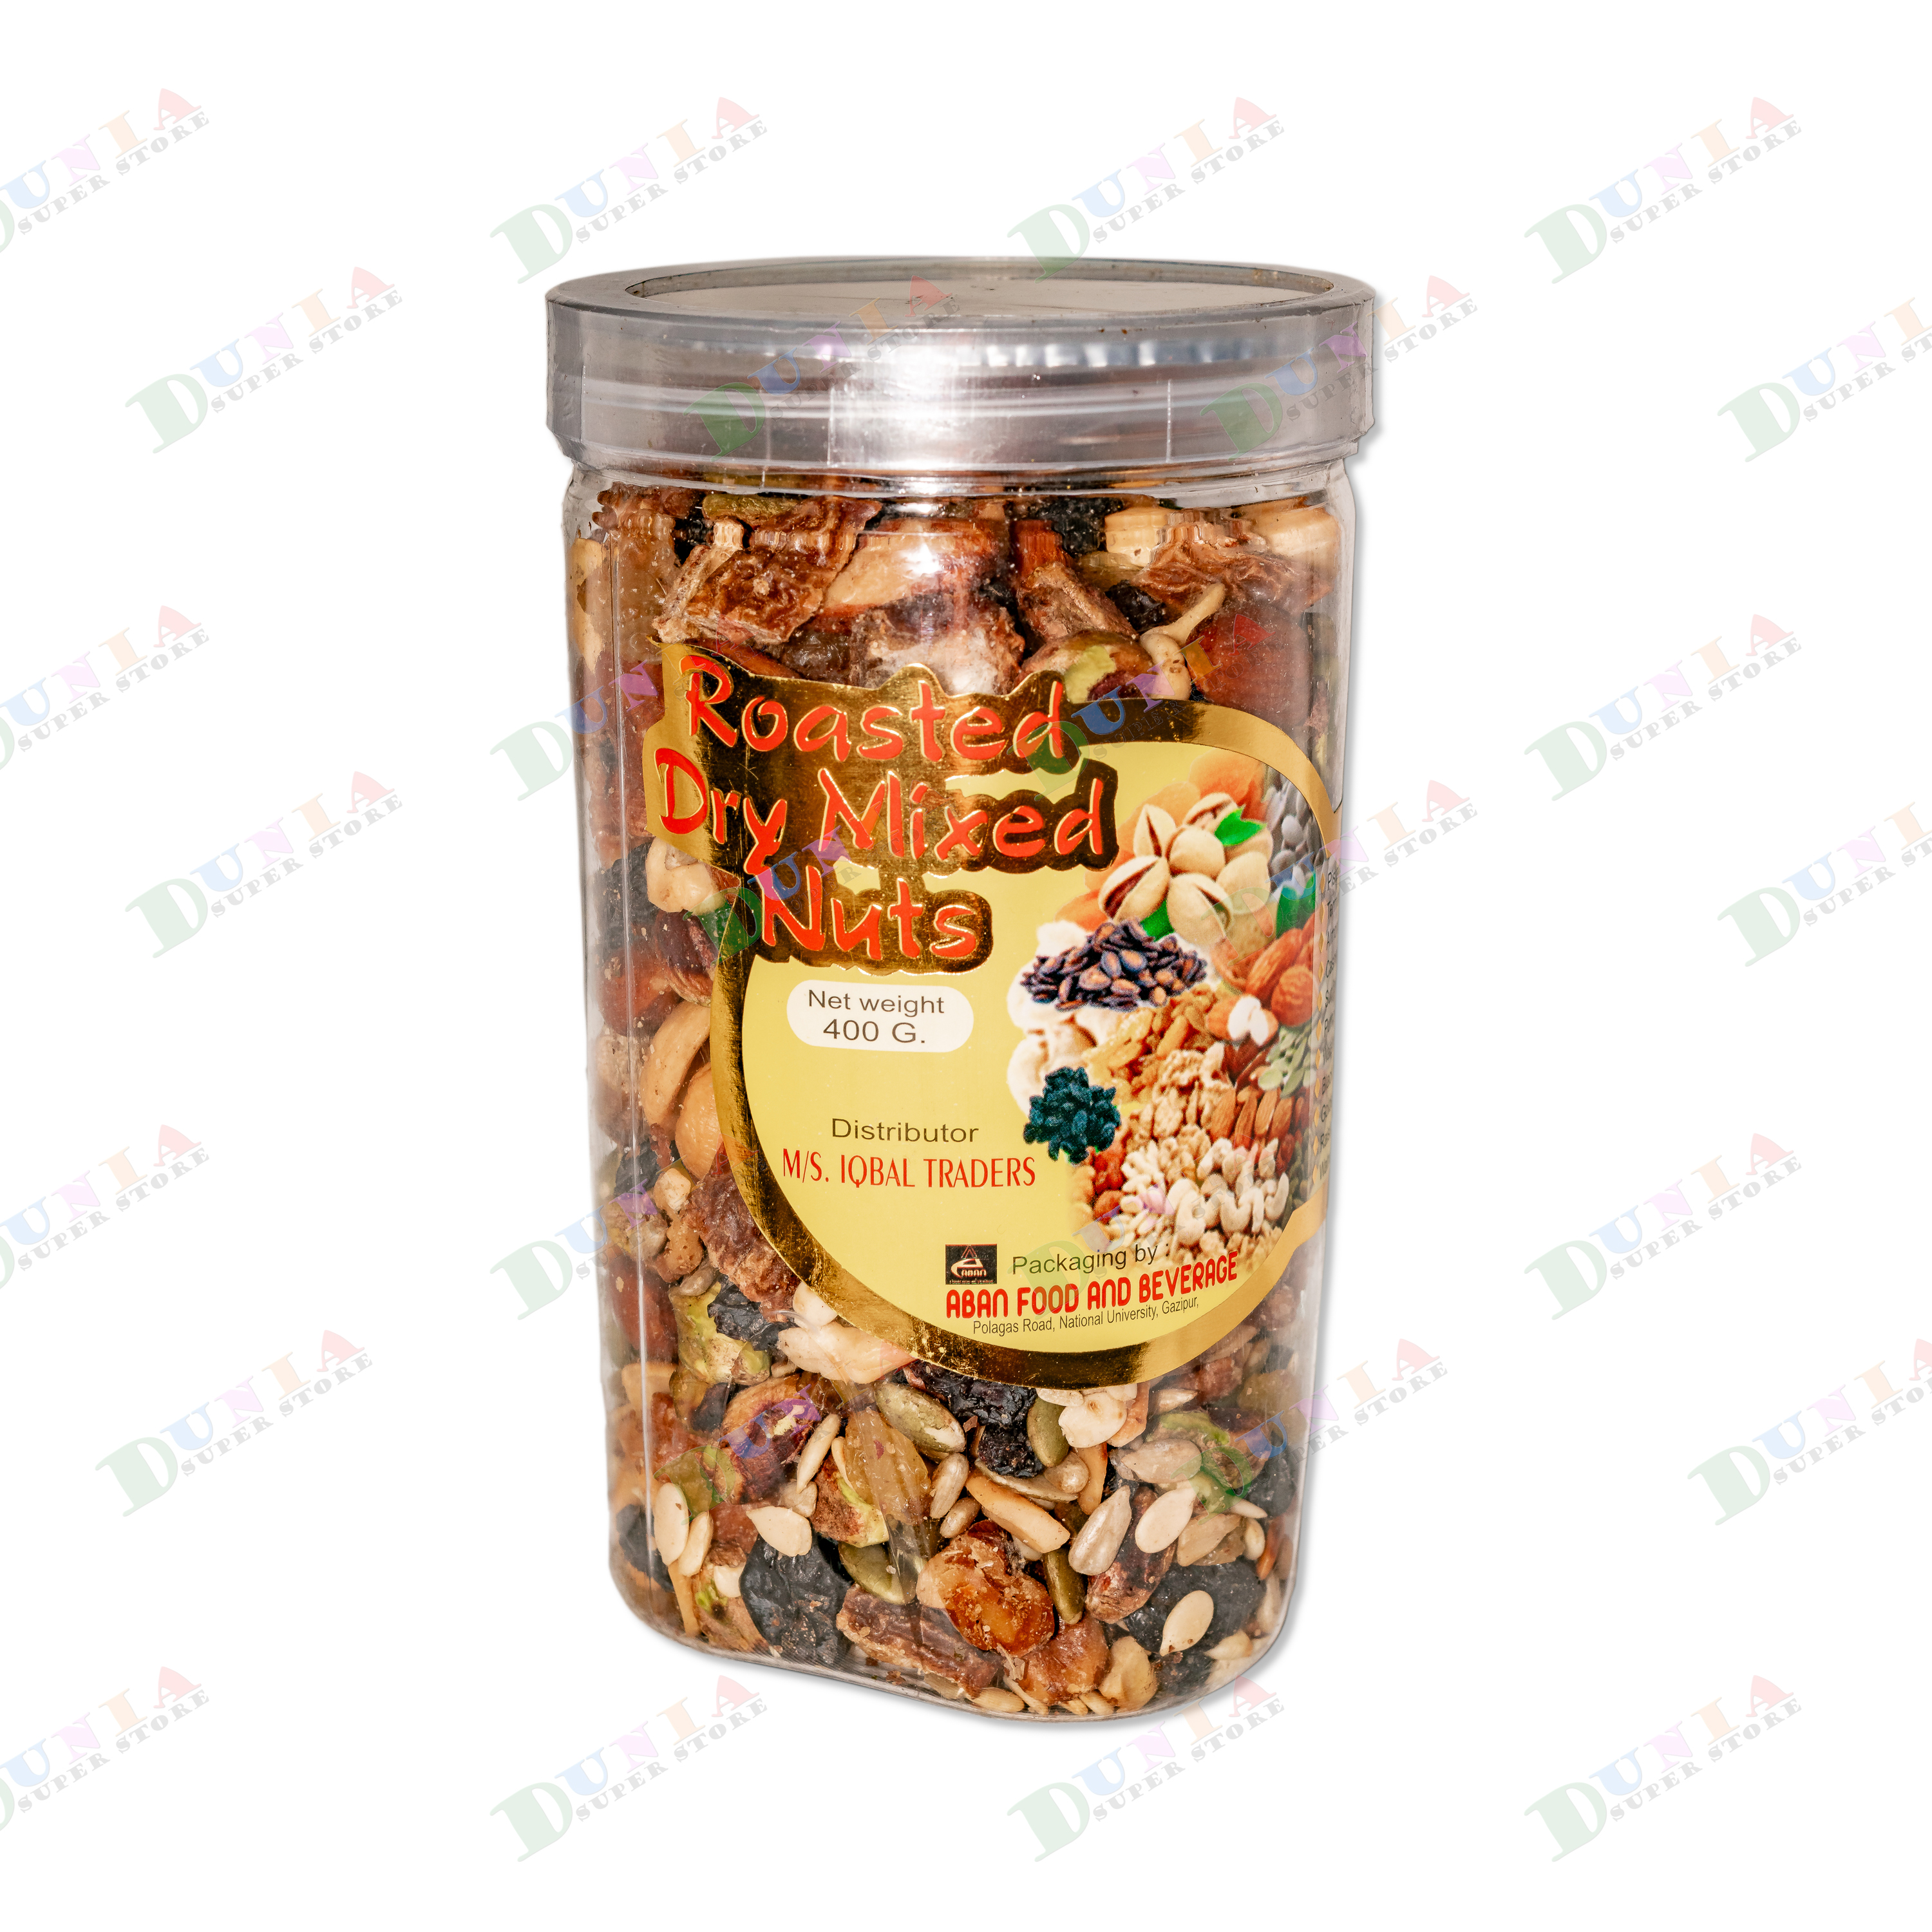 Roasted Dry Mix Nuts 400g